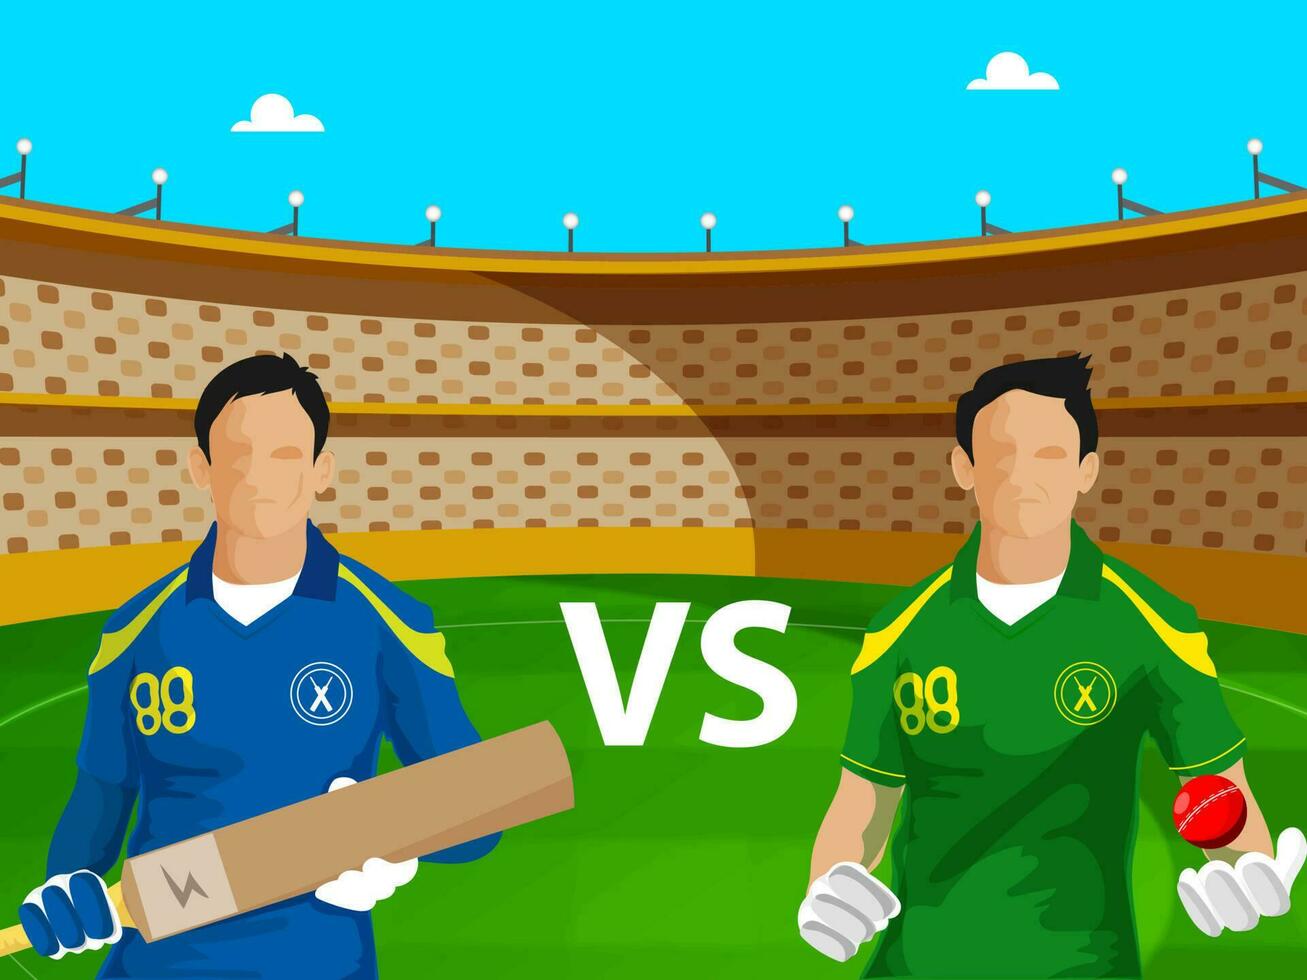 Faceless Batsman And Bowler Player Of Participating Countries Team Against Cricket Stadium Background. vector